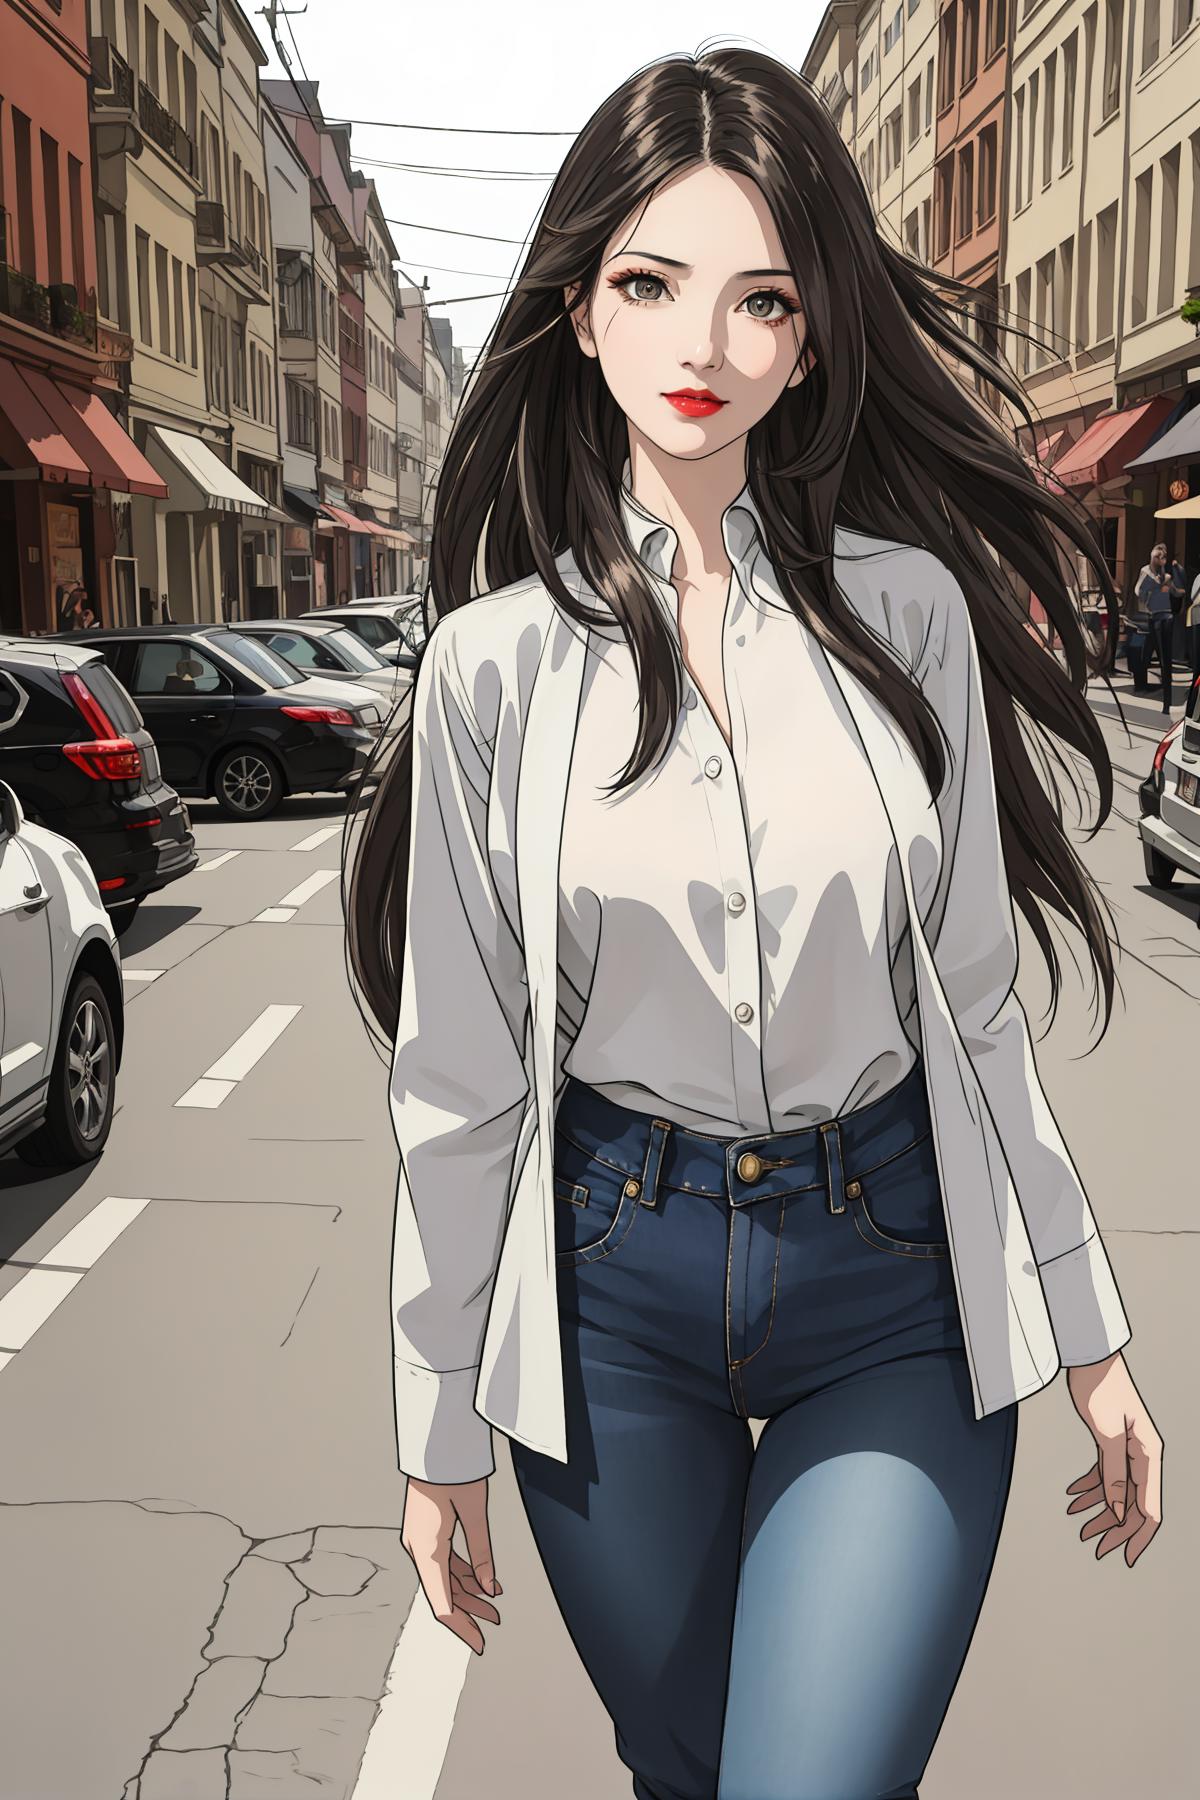 A Beautiful Anime Woman Walking Down a Street in a White Shirt and Blue Jeans.